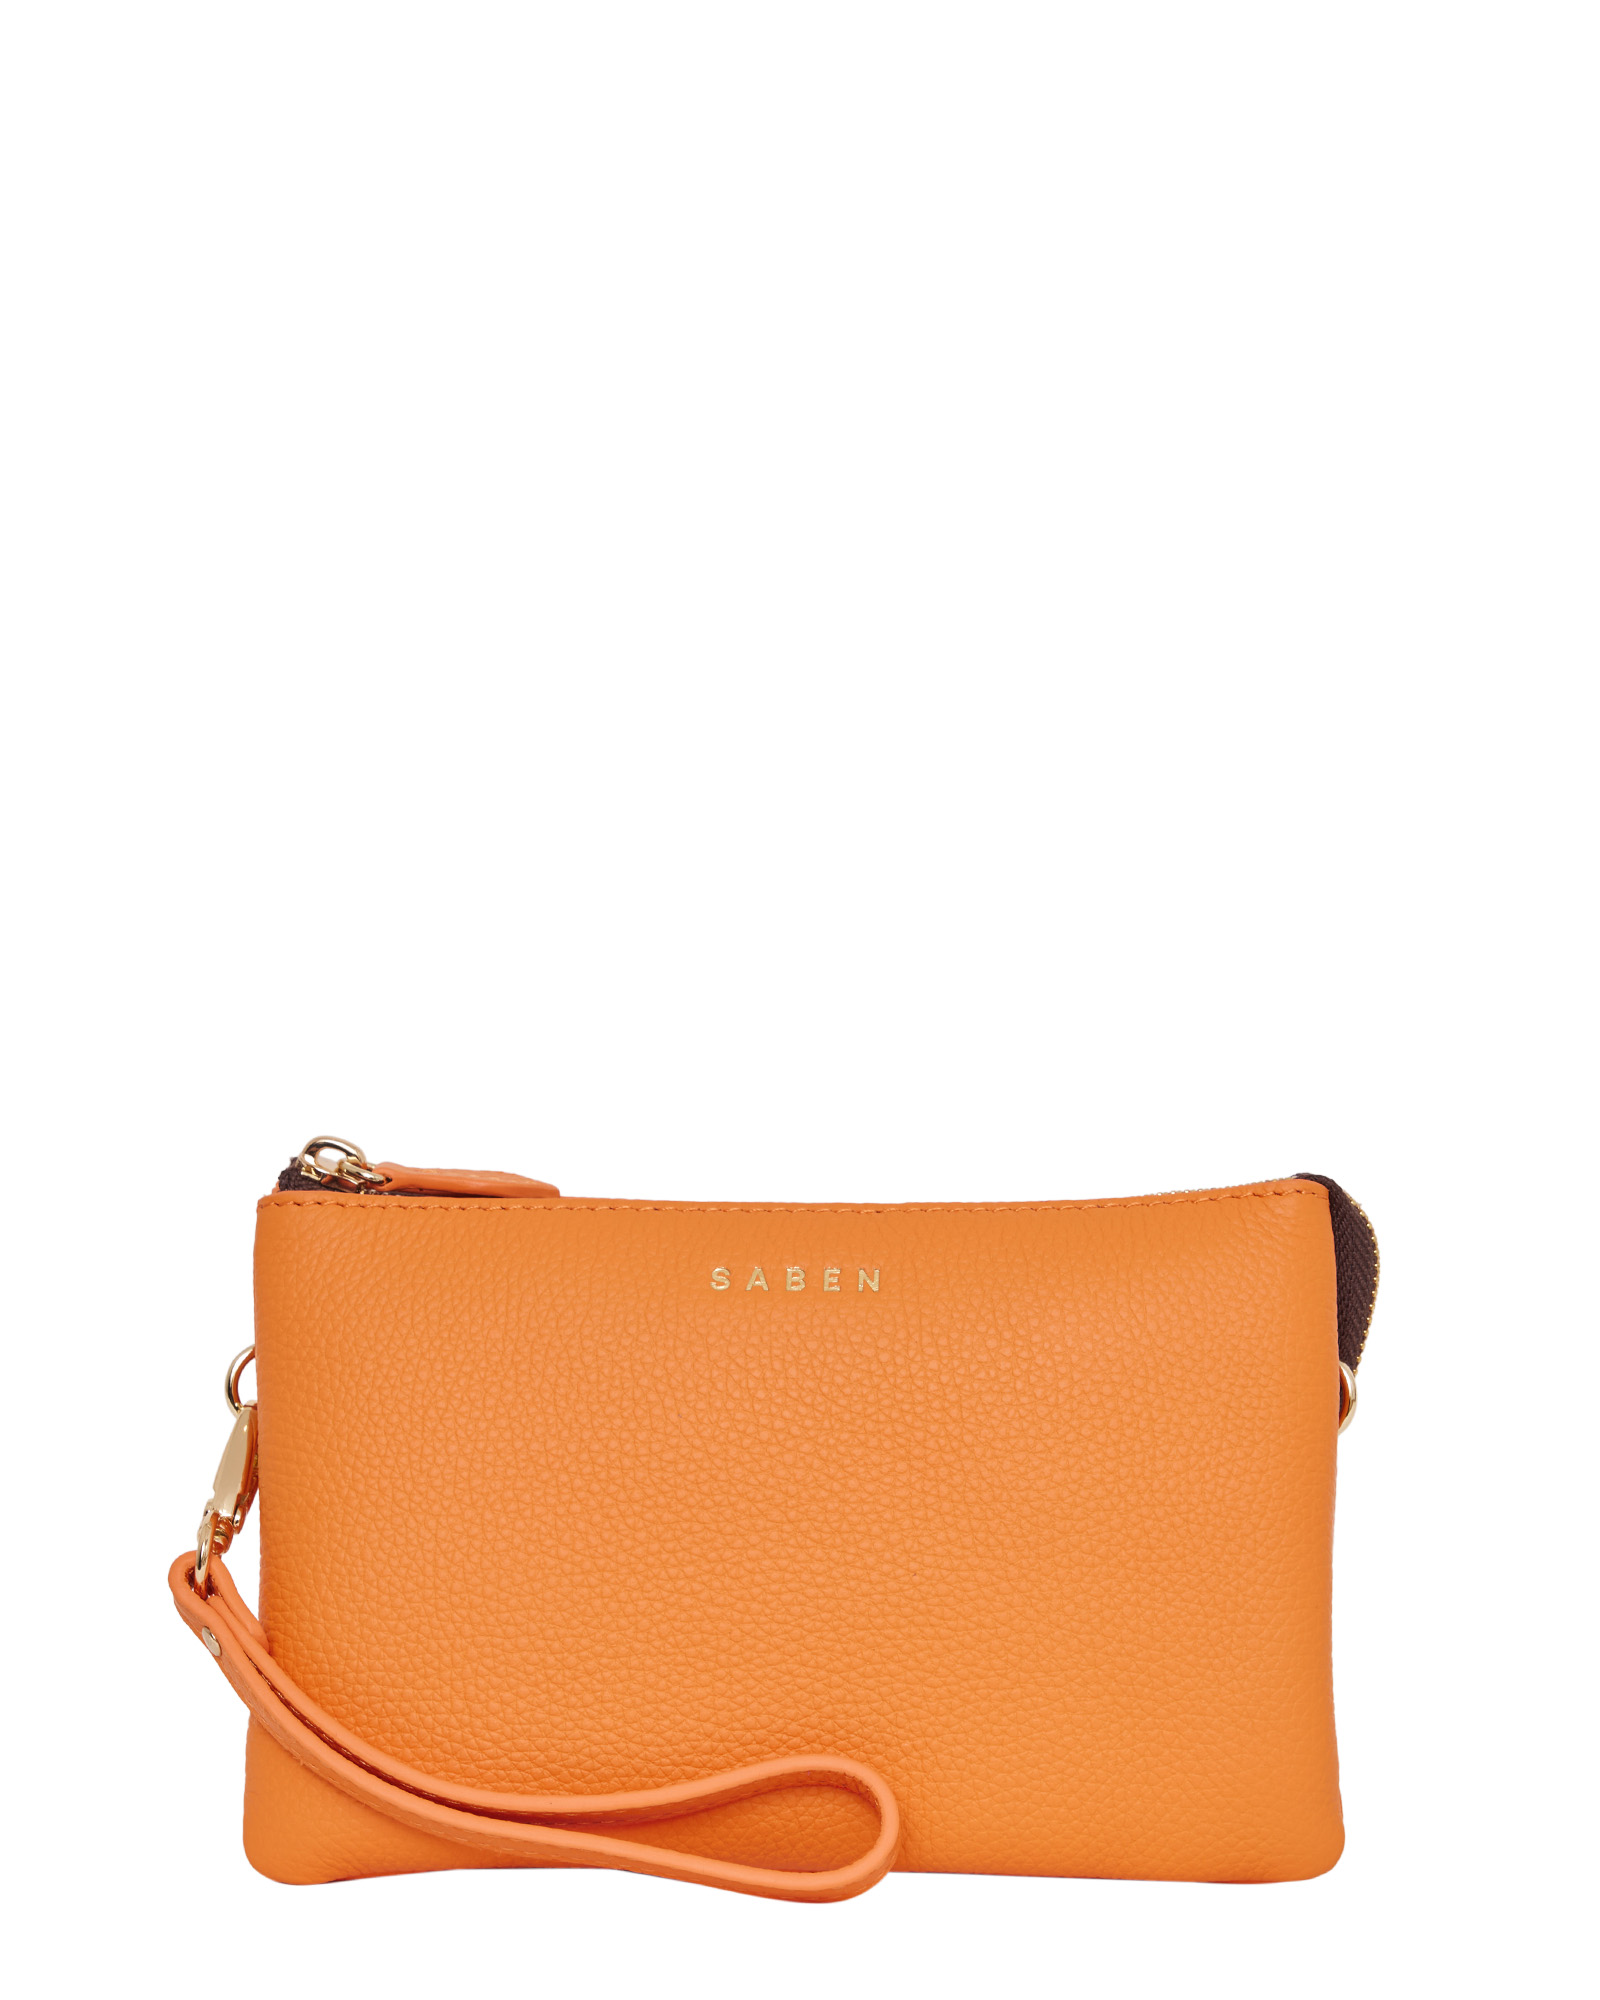 Saben Tilly Crossbody Melon - Issimo Shoes